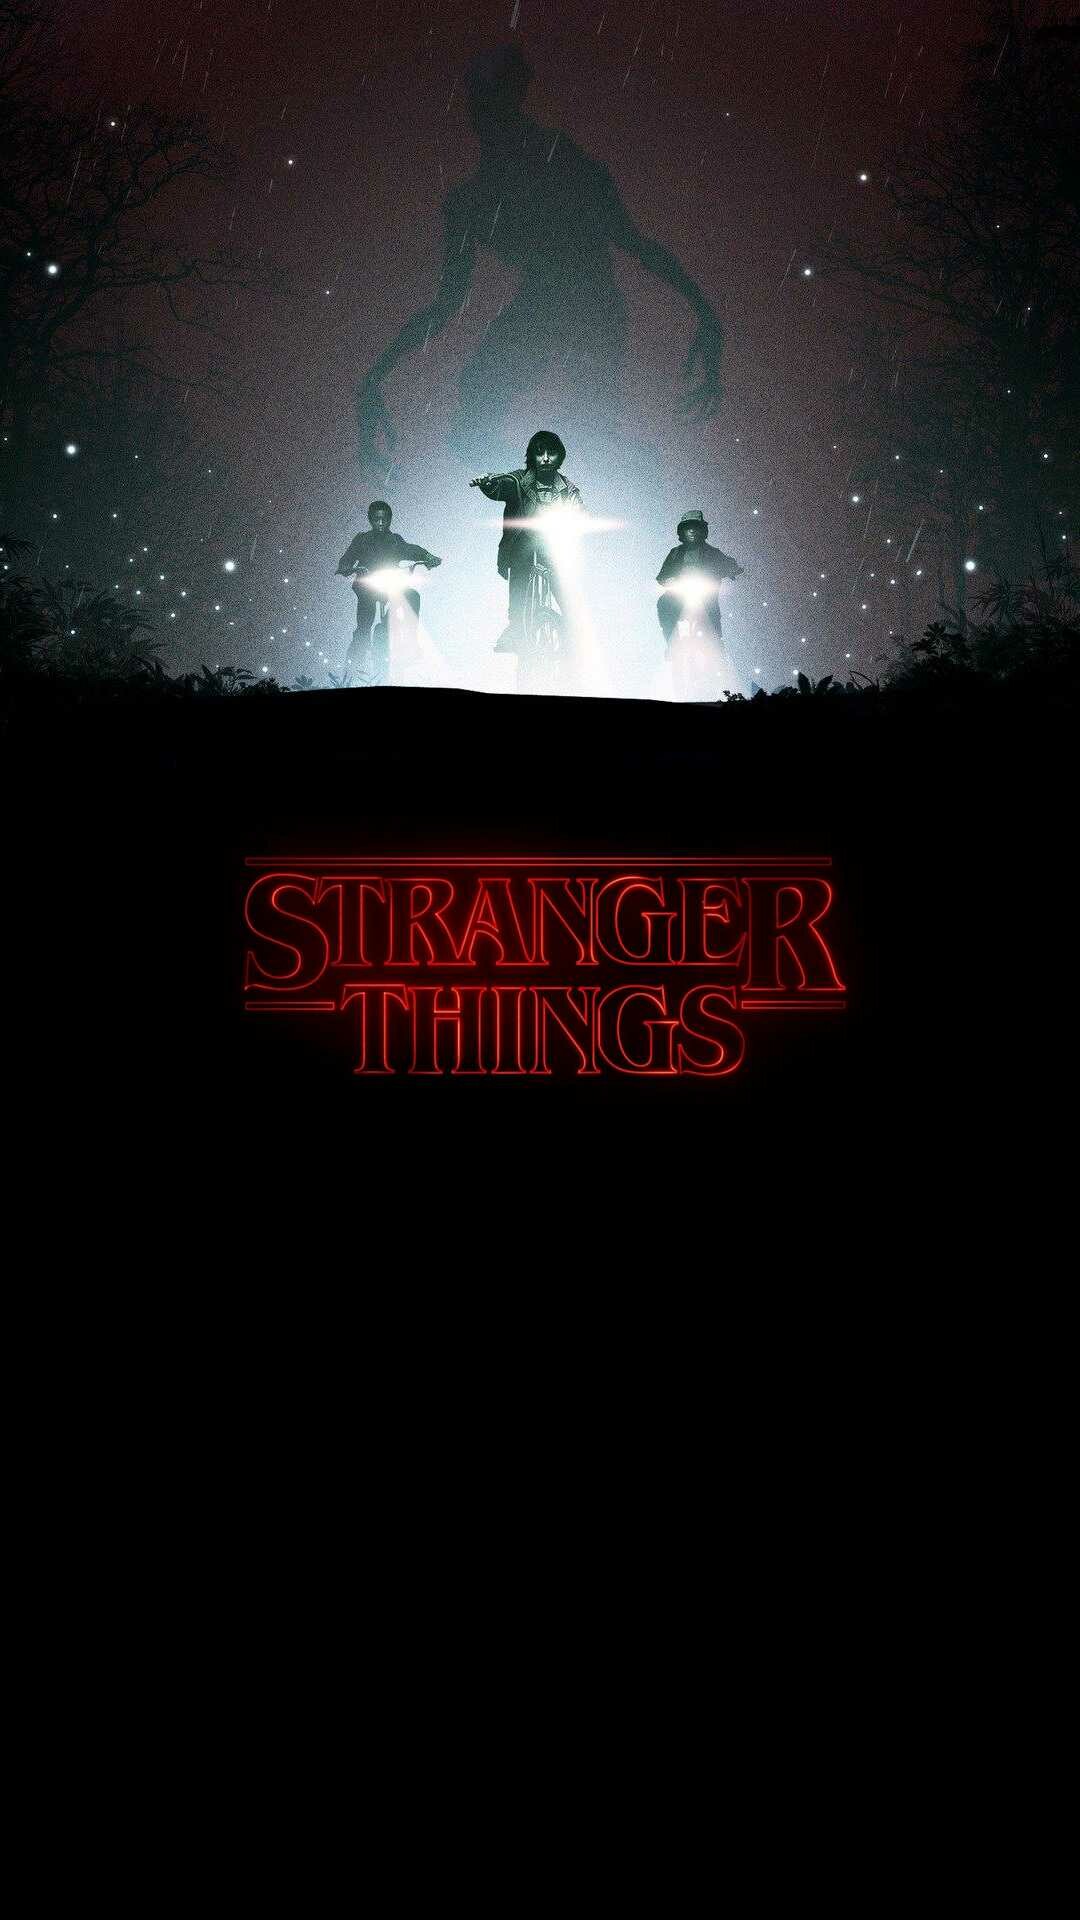 Stranger Things: Received The Saturn Award for Best New Media Television Series in 2017. 1080x1920 Full HD Background.